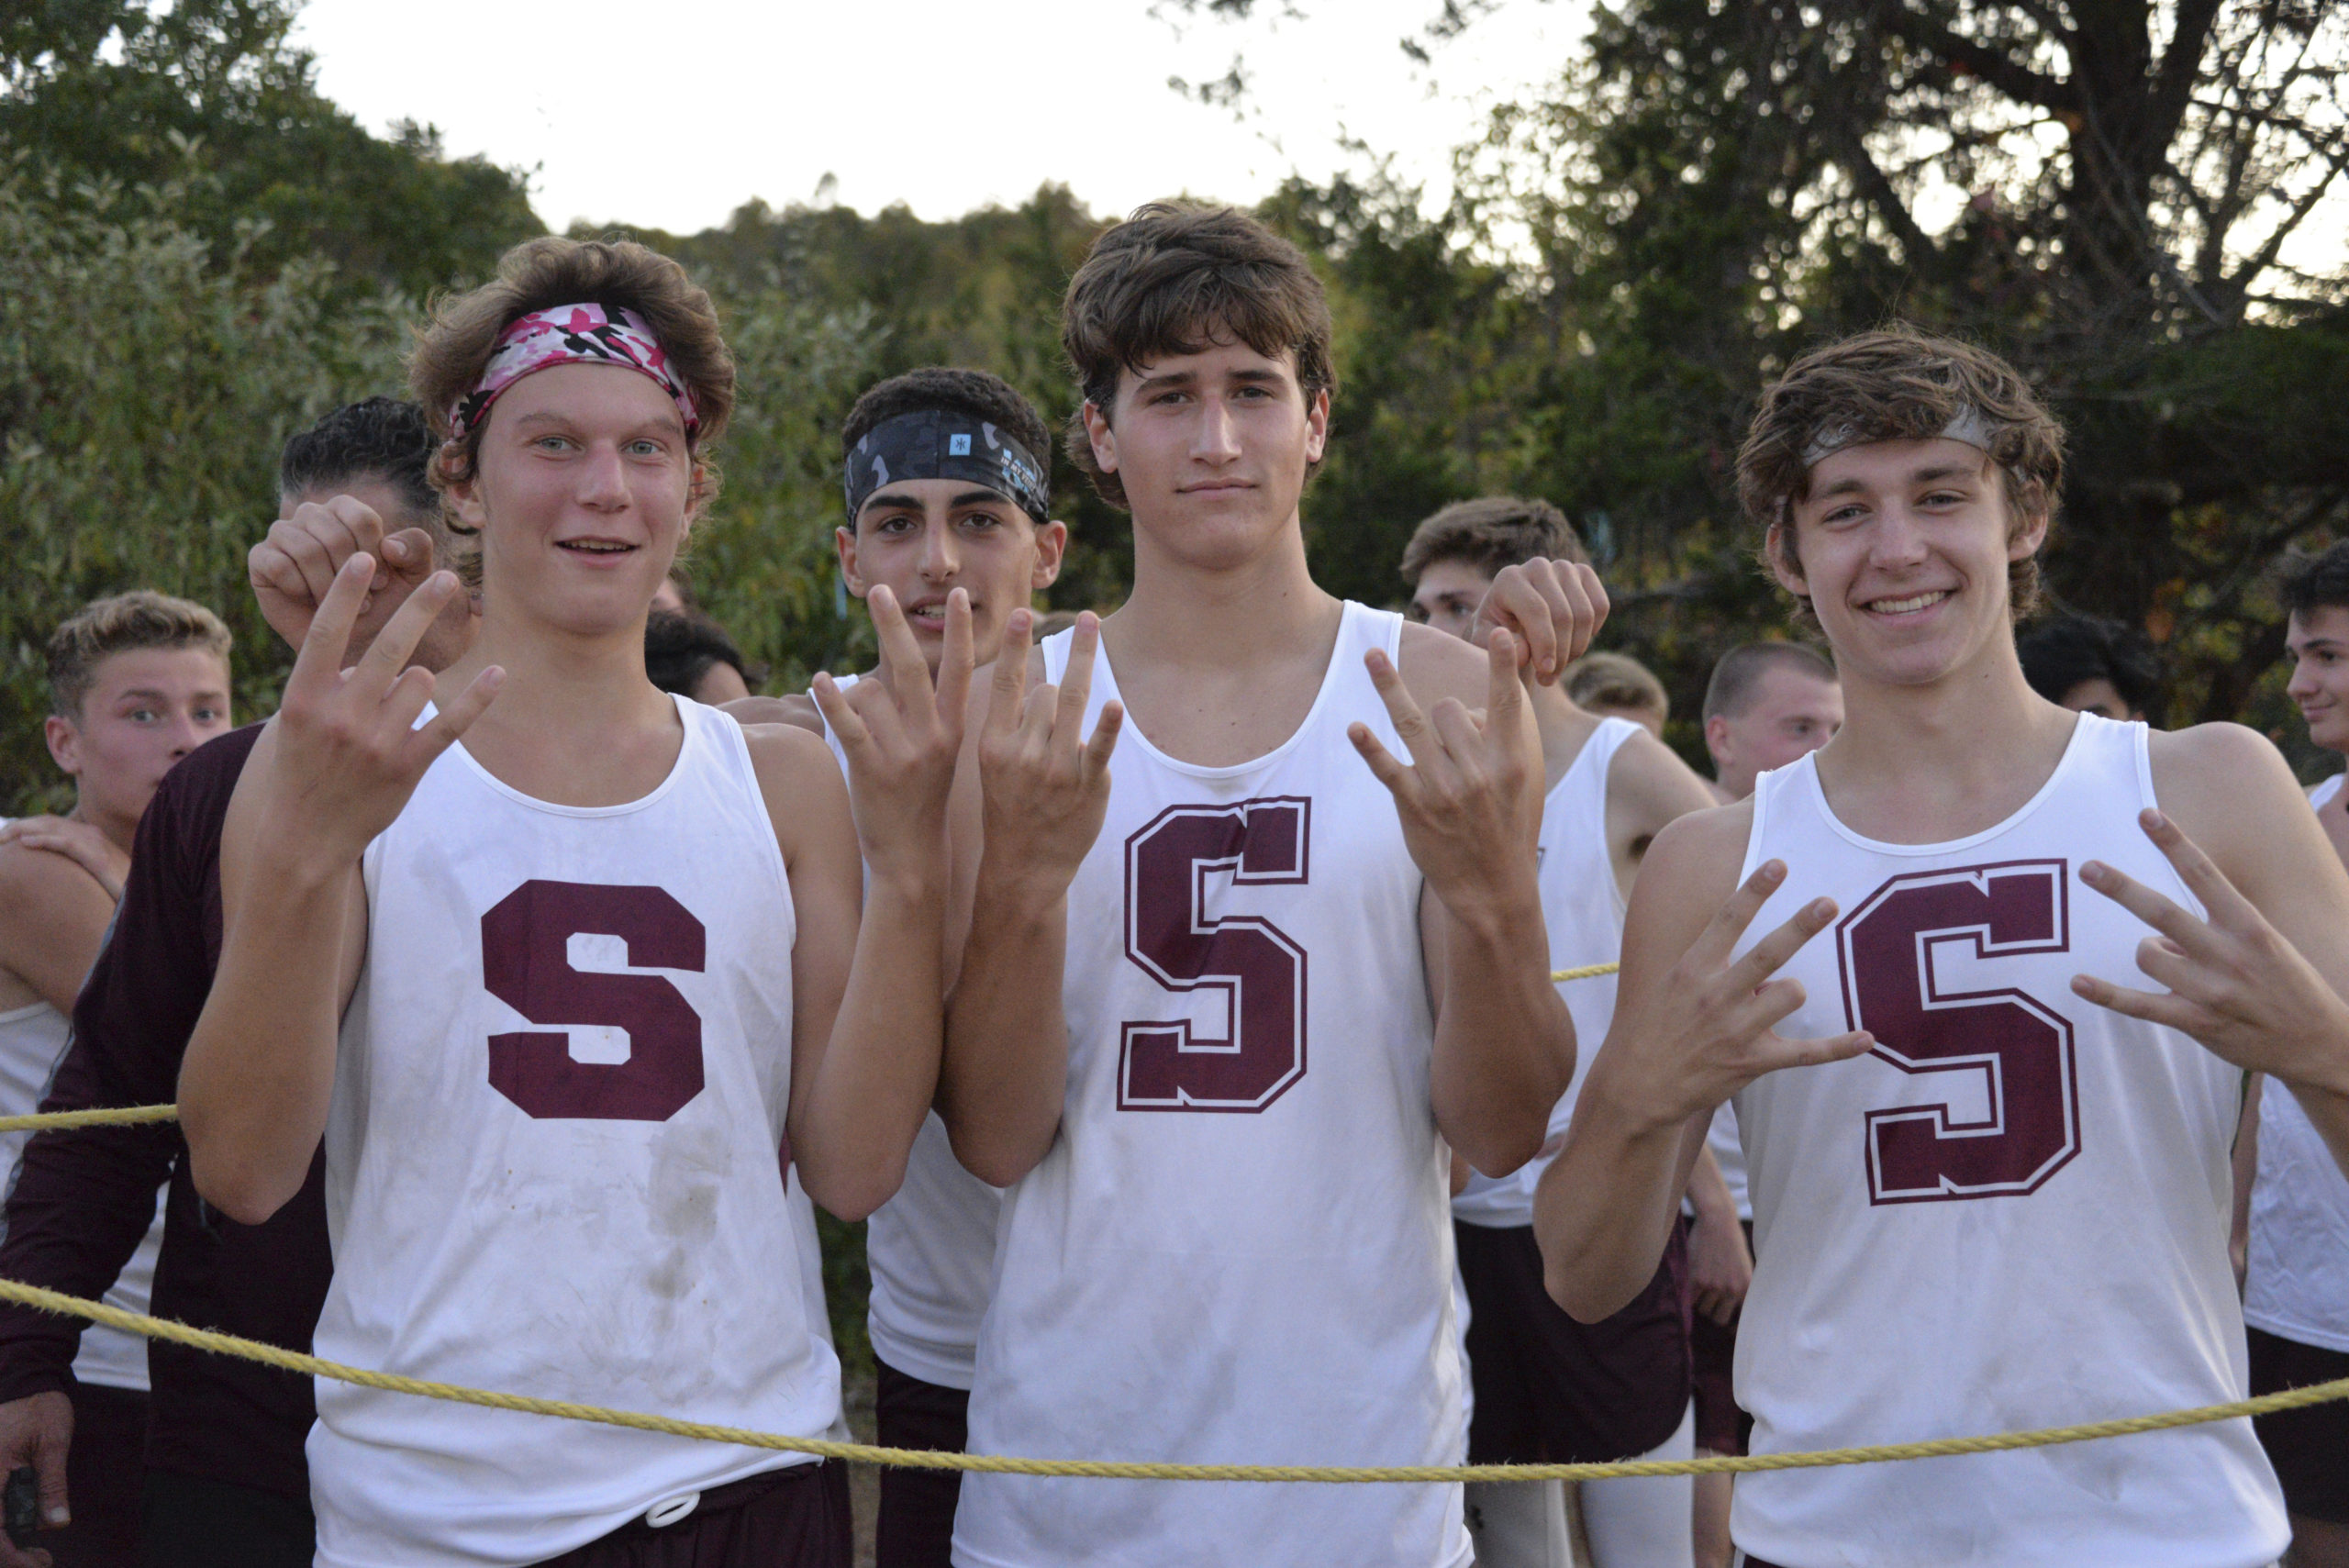 Count 'Em: Six Straight League Titles 
October 24 -- Southampton boys cross country team members Griffin Schwartz, Artemi Gavalas, Billy Malone and Zac Mobius hold up six for the amount of consecutive league titles the Mariners have won.